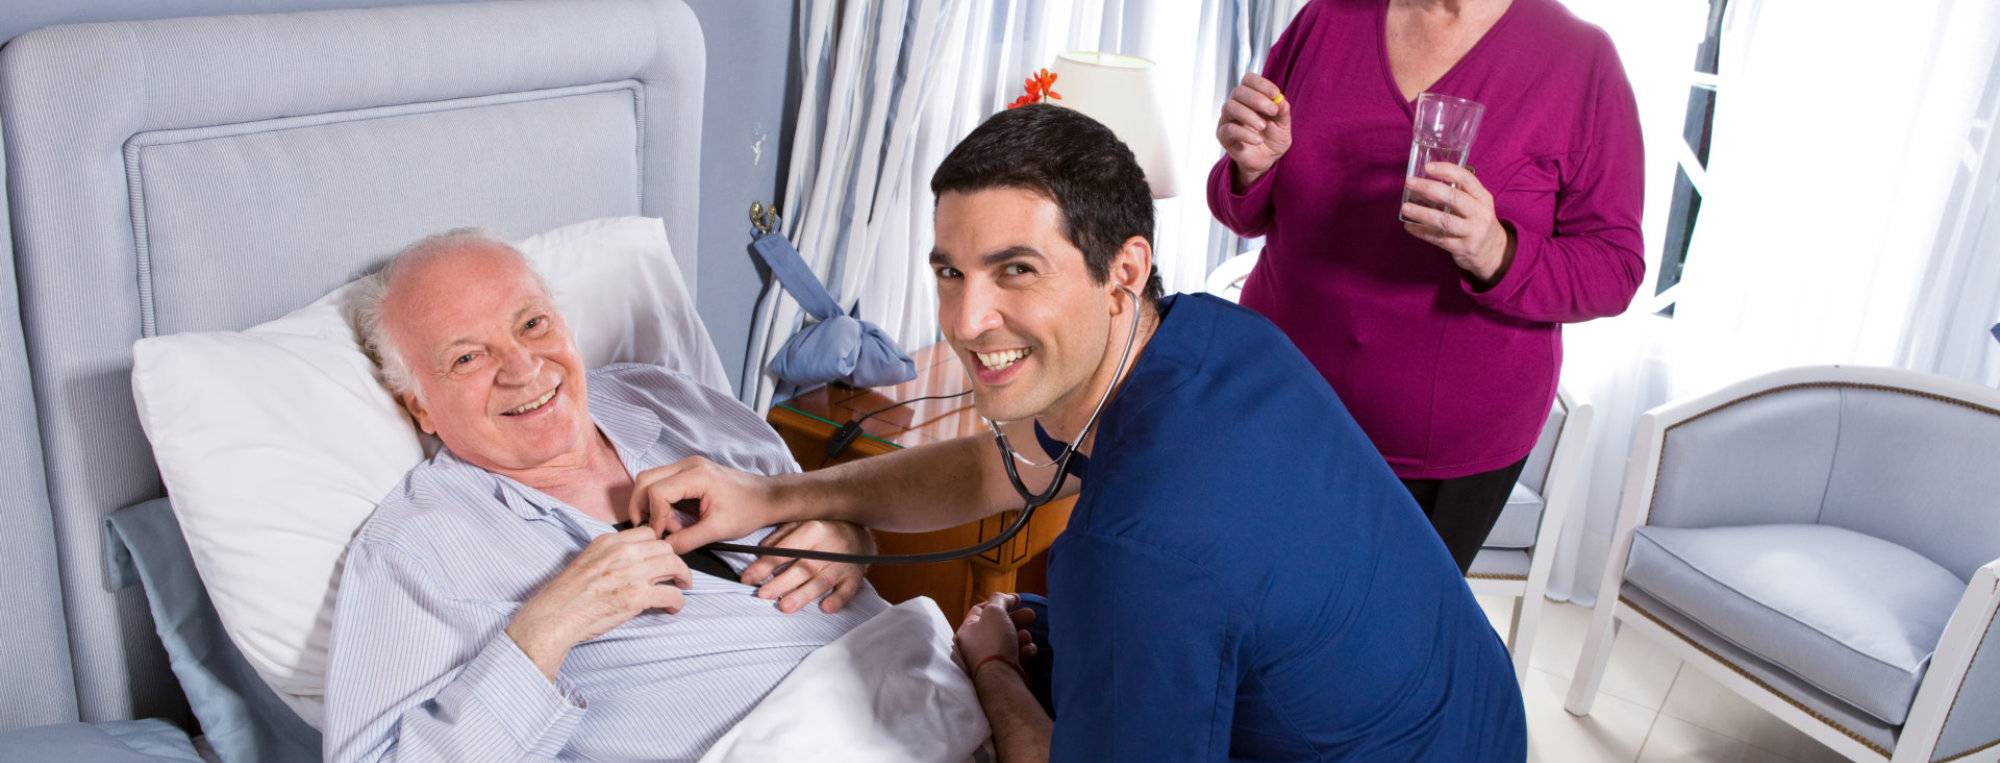 caregiver checking the measure of heartbeat of senior man on the bed